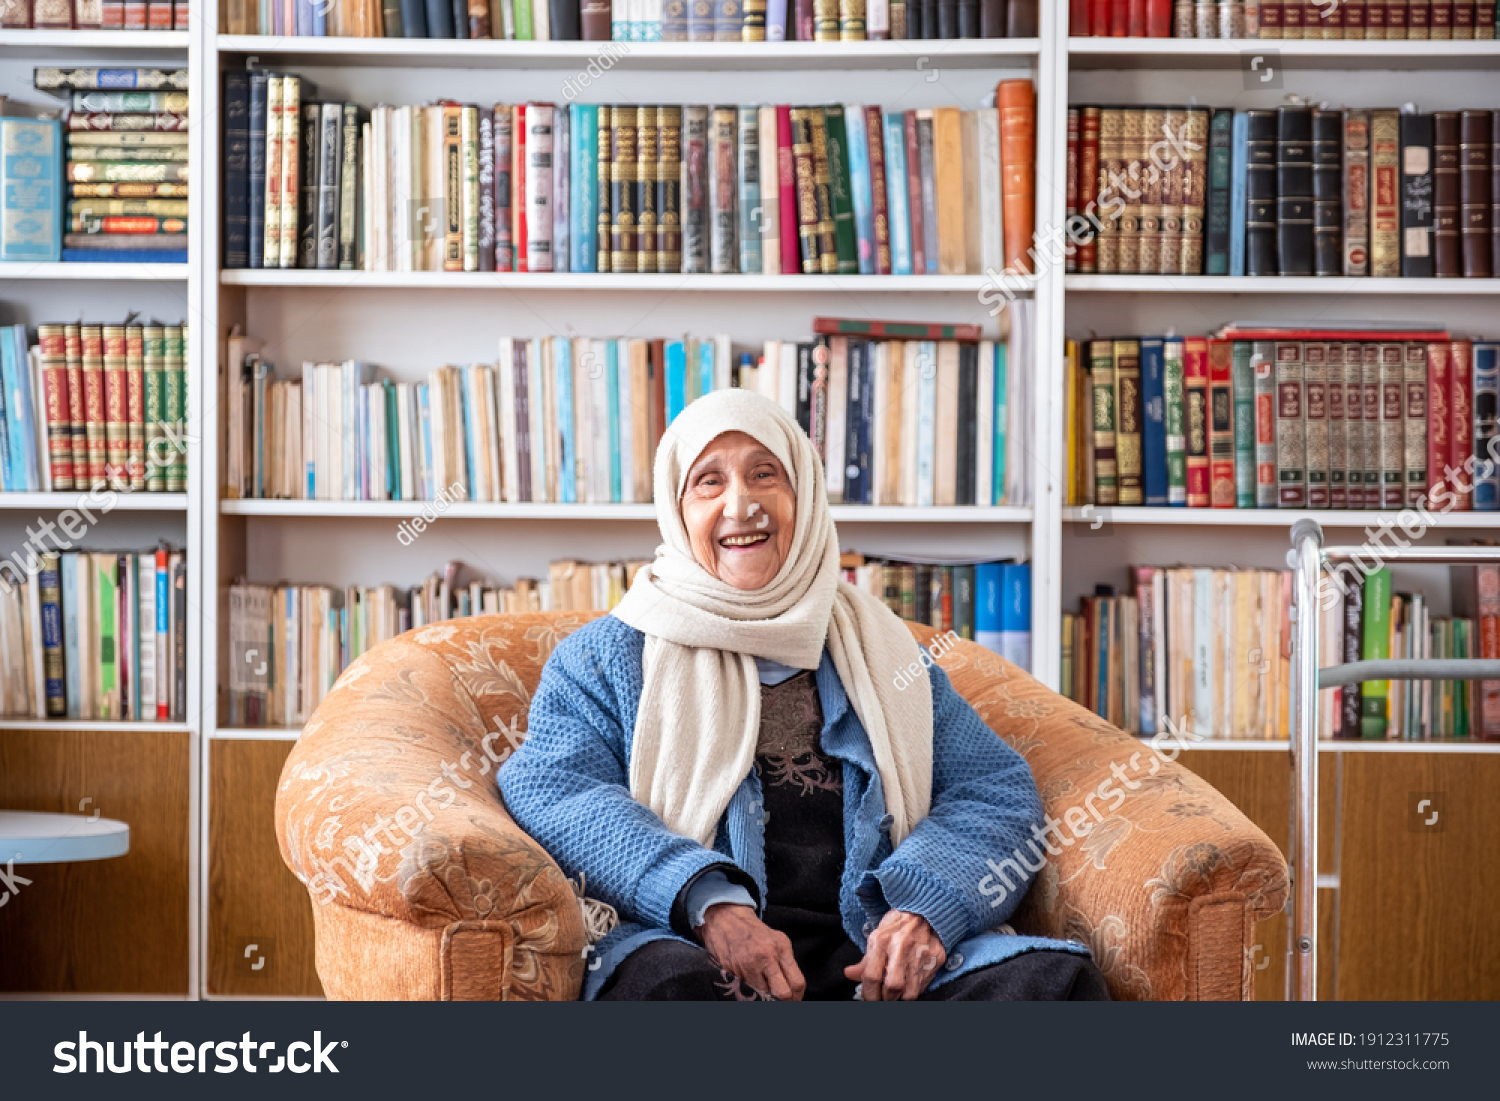 Arabic old woman sitting on couch in her home with a library background #1912311775